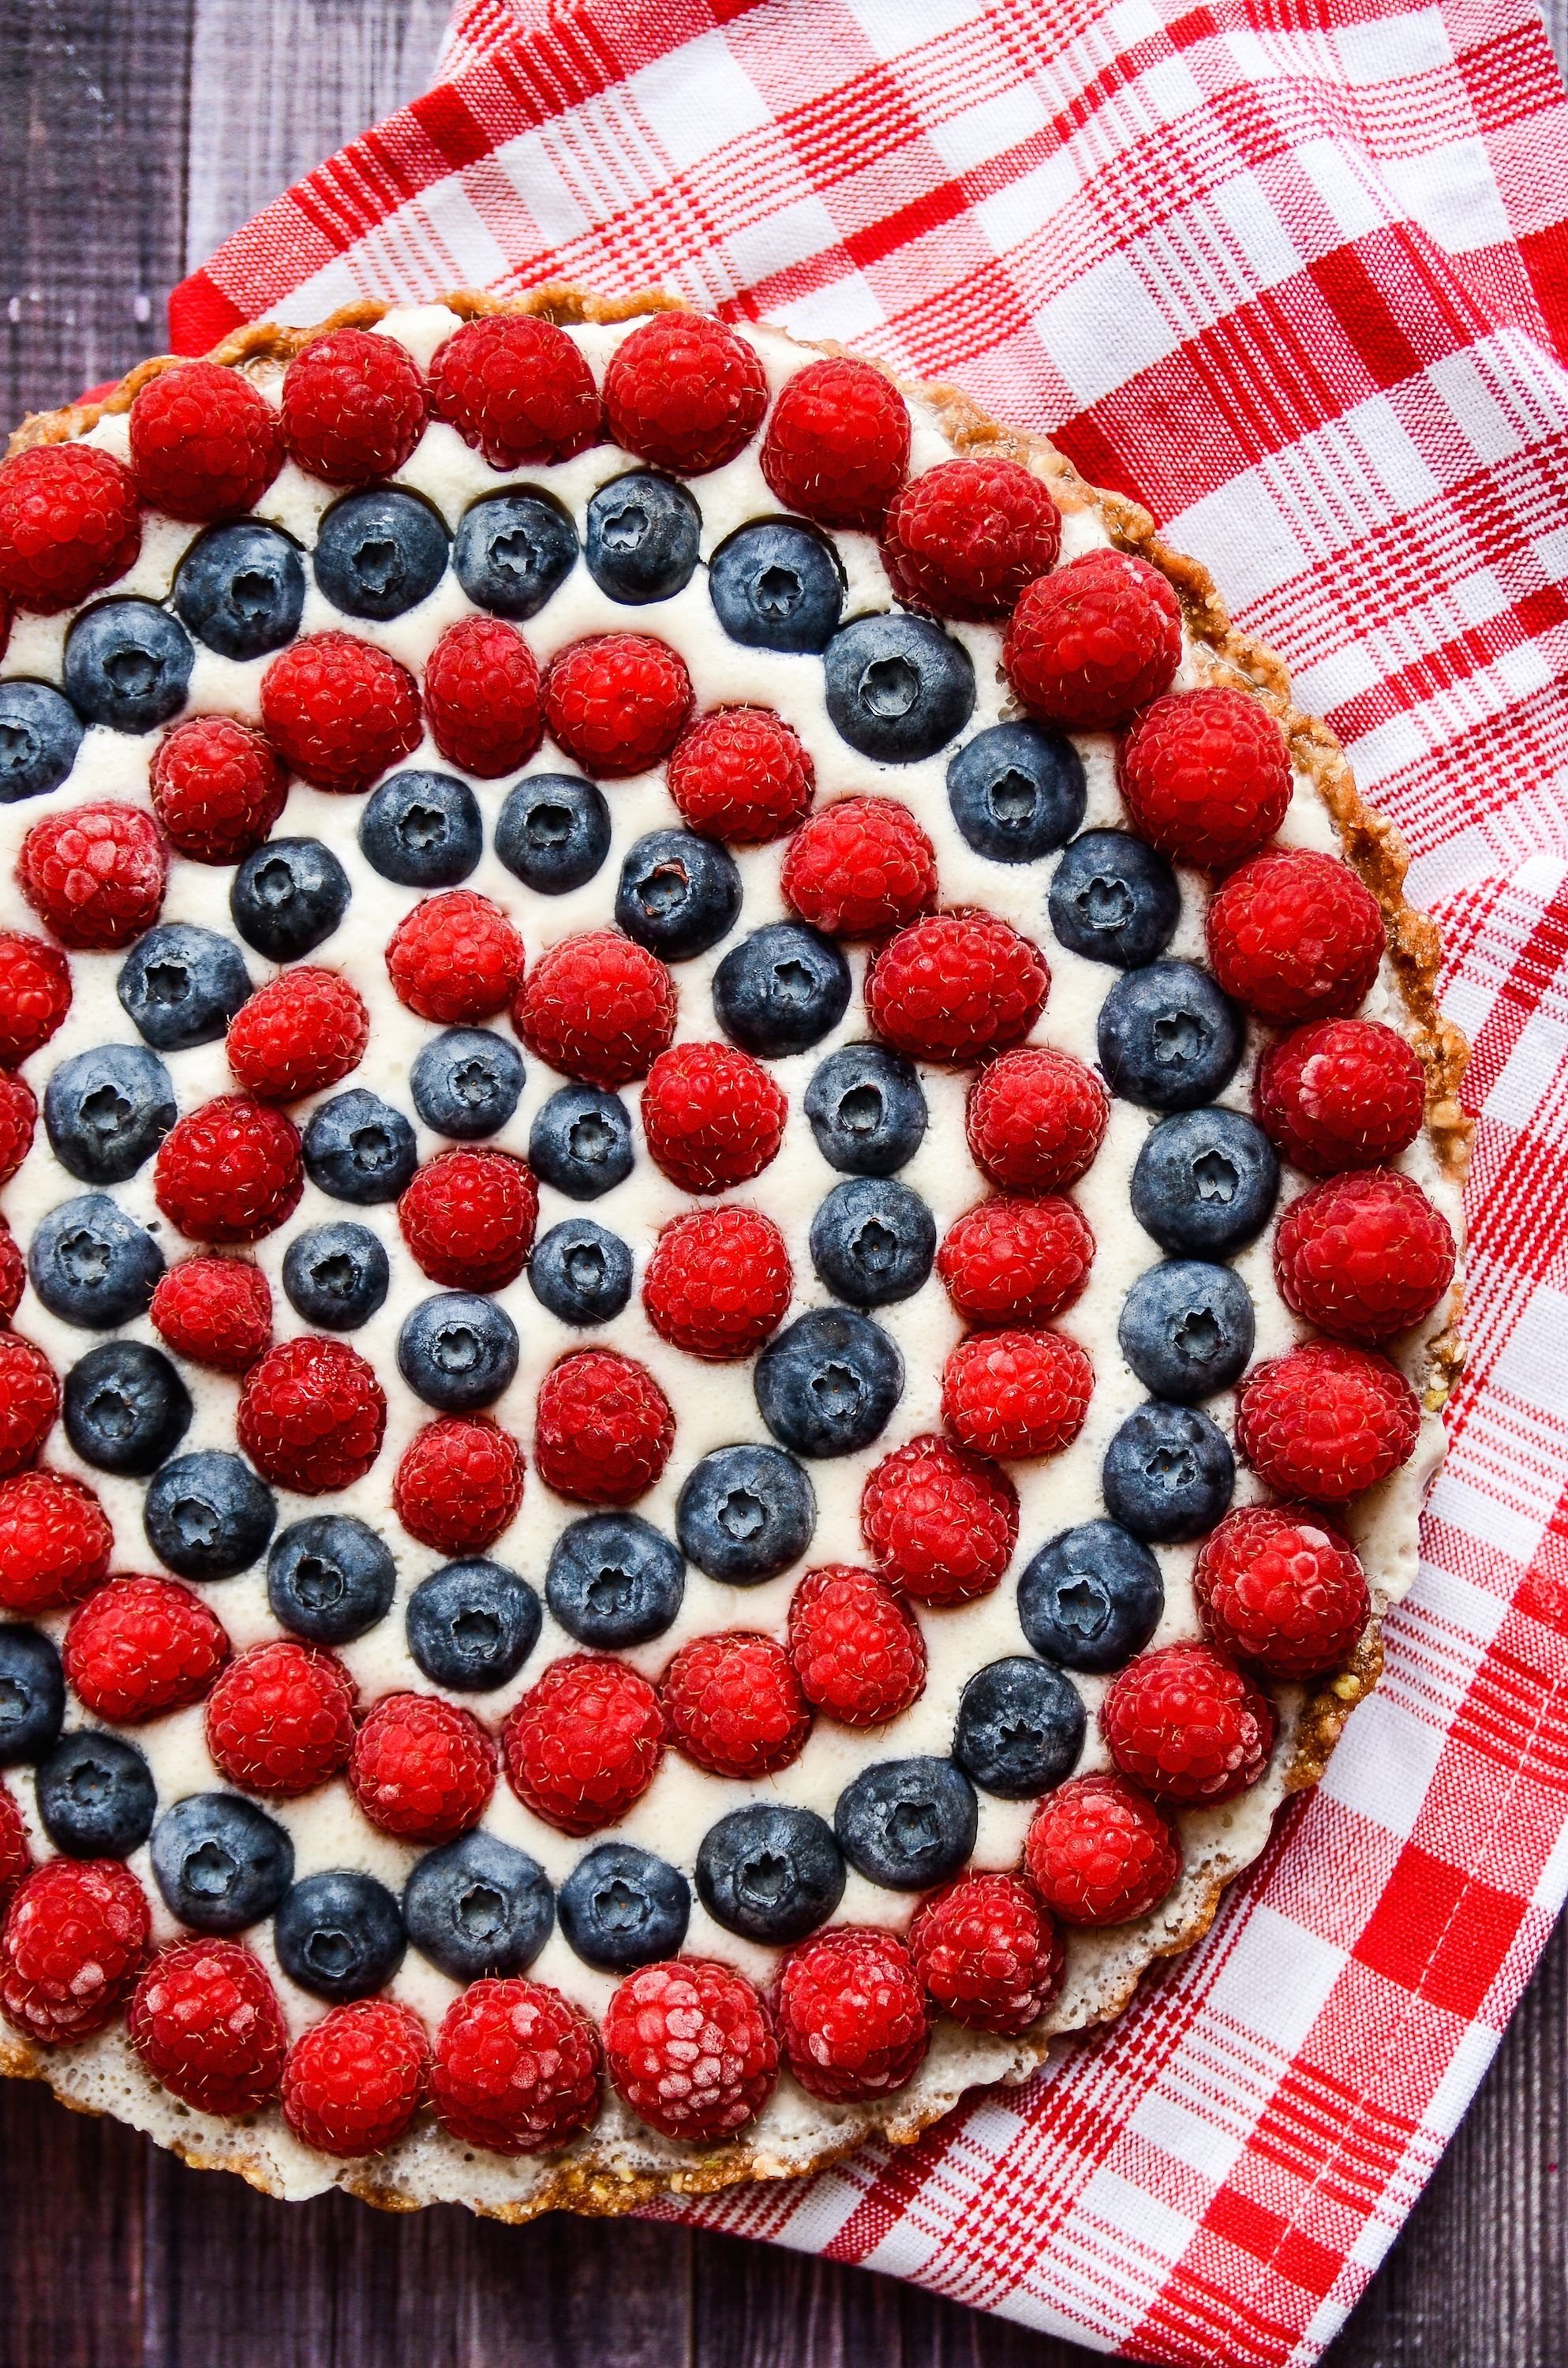 10 Spectacular 4Th Of July Dessert Ideas 20 4th of july dessert recipes easy fourth of july desserts 1 2022